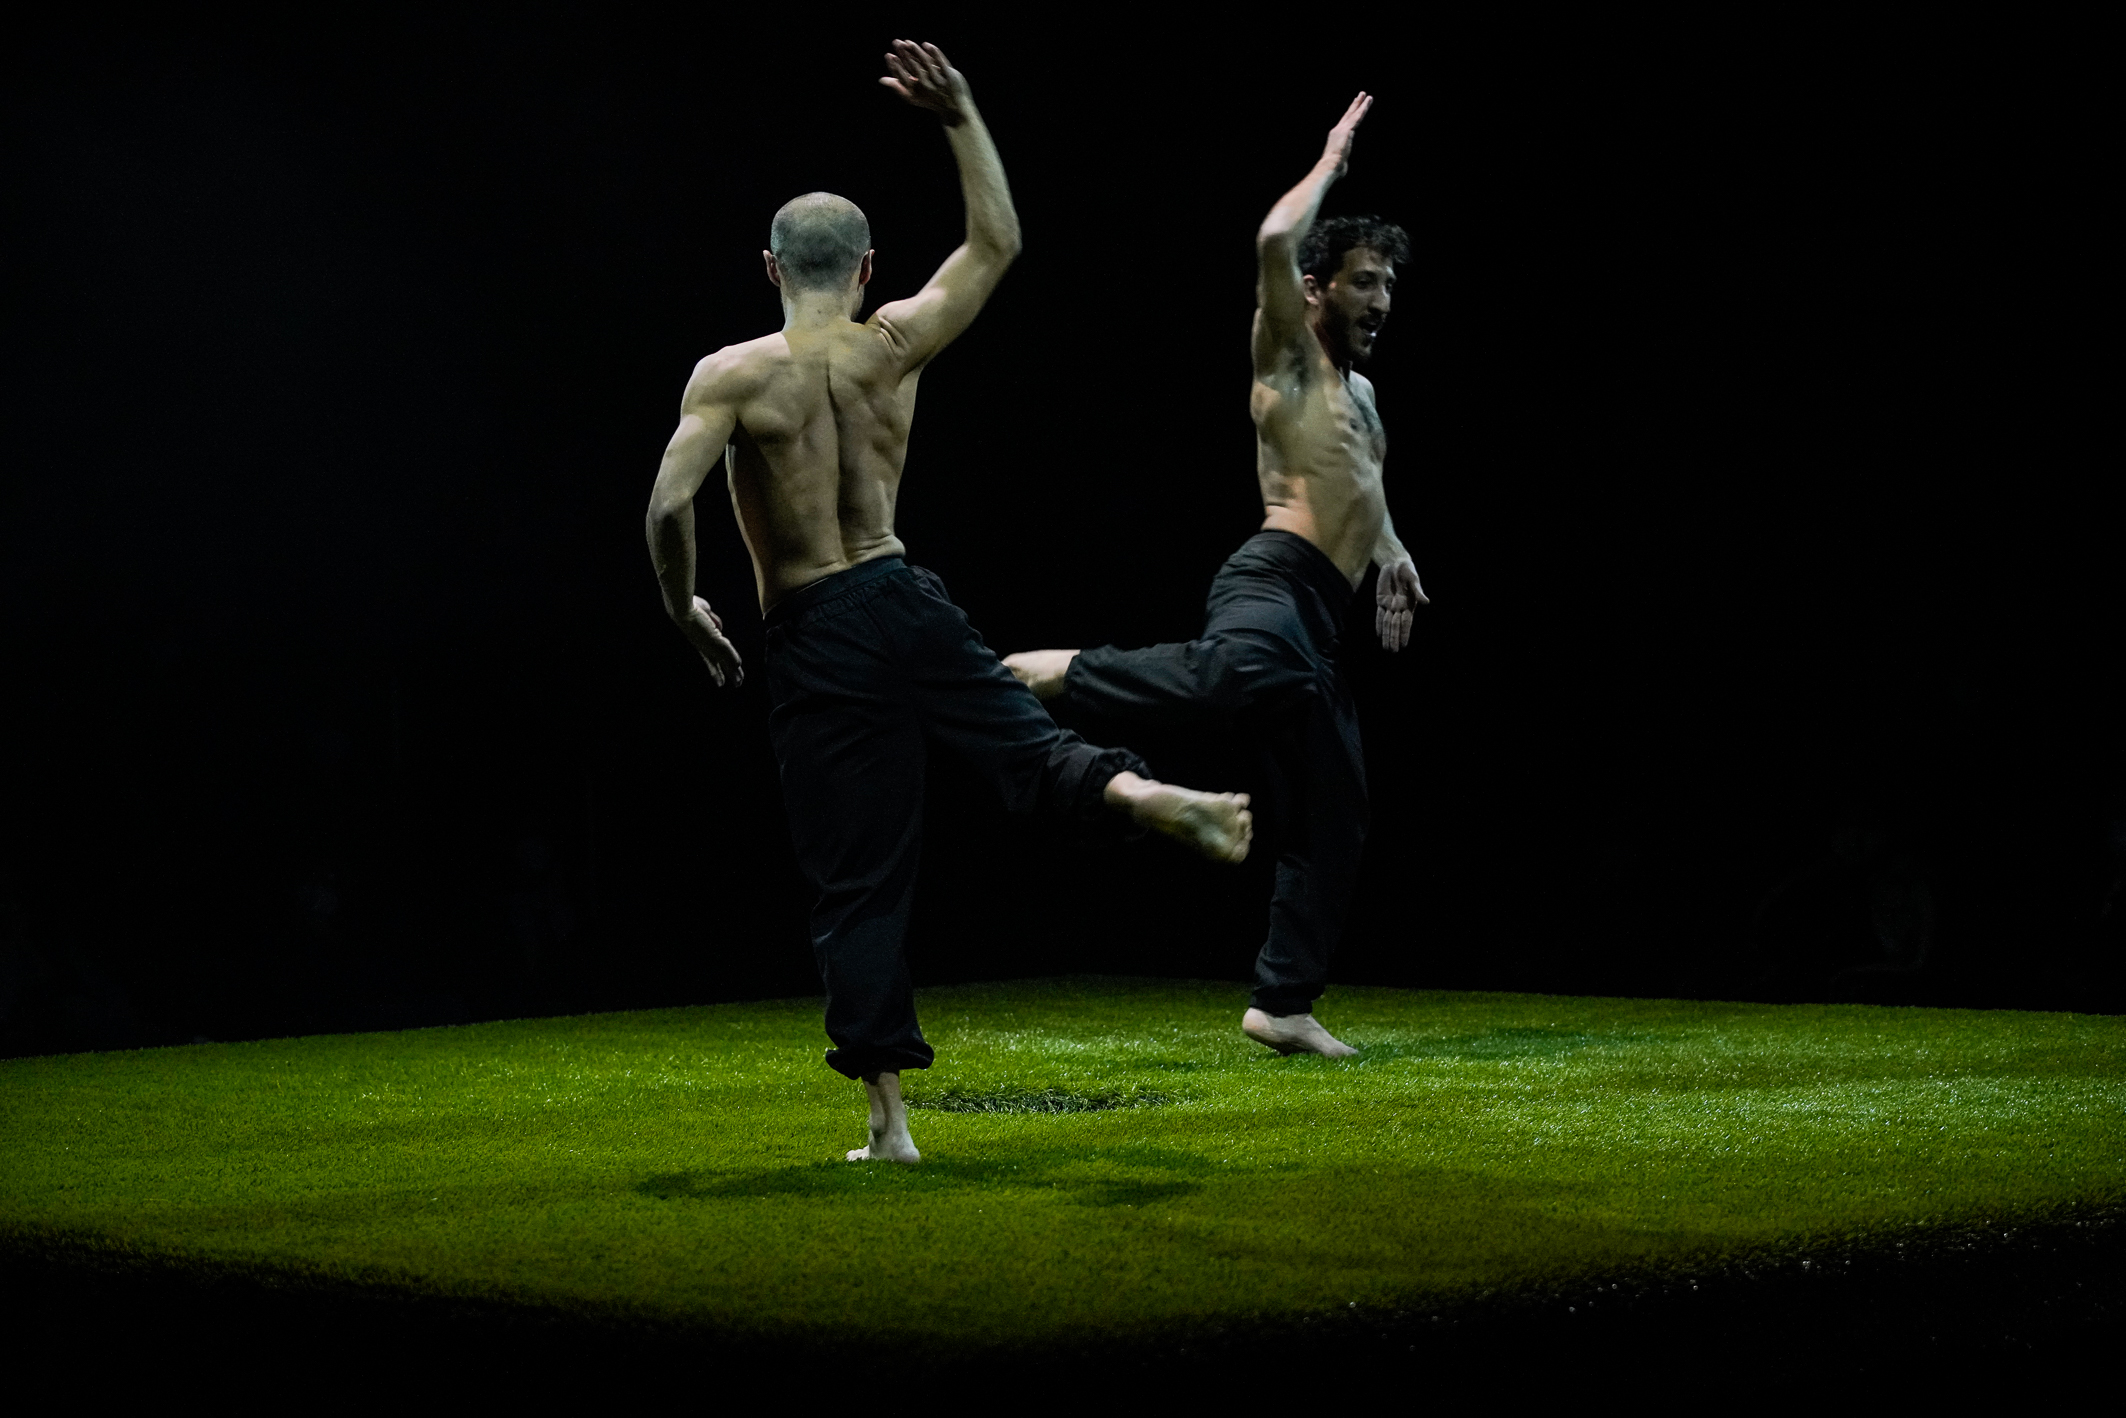 Two dancers stand with black trousers and no top, dancing on a grassy area spread out on a stage.